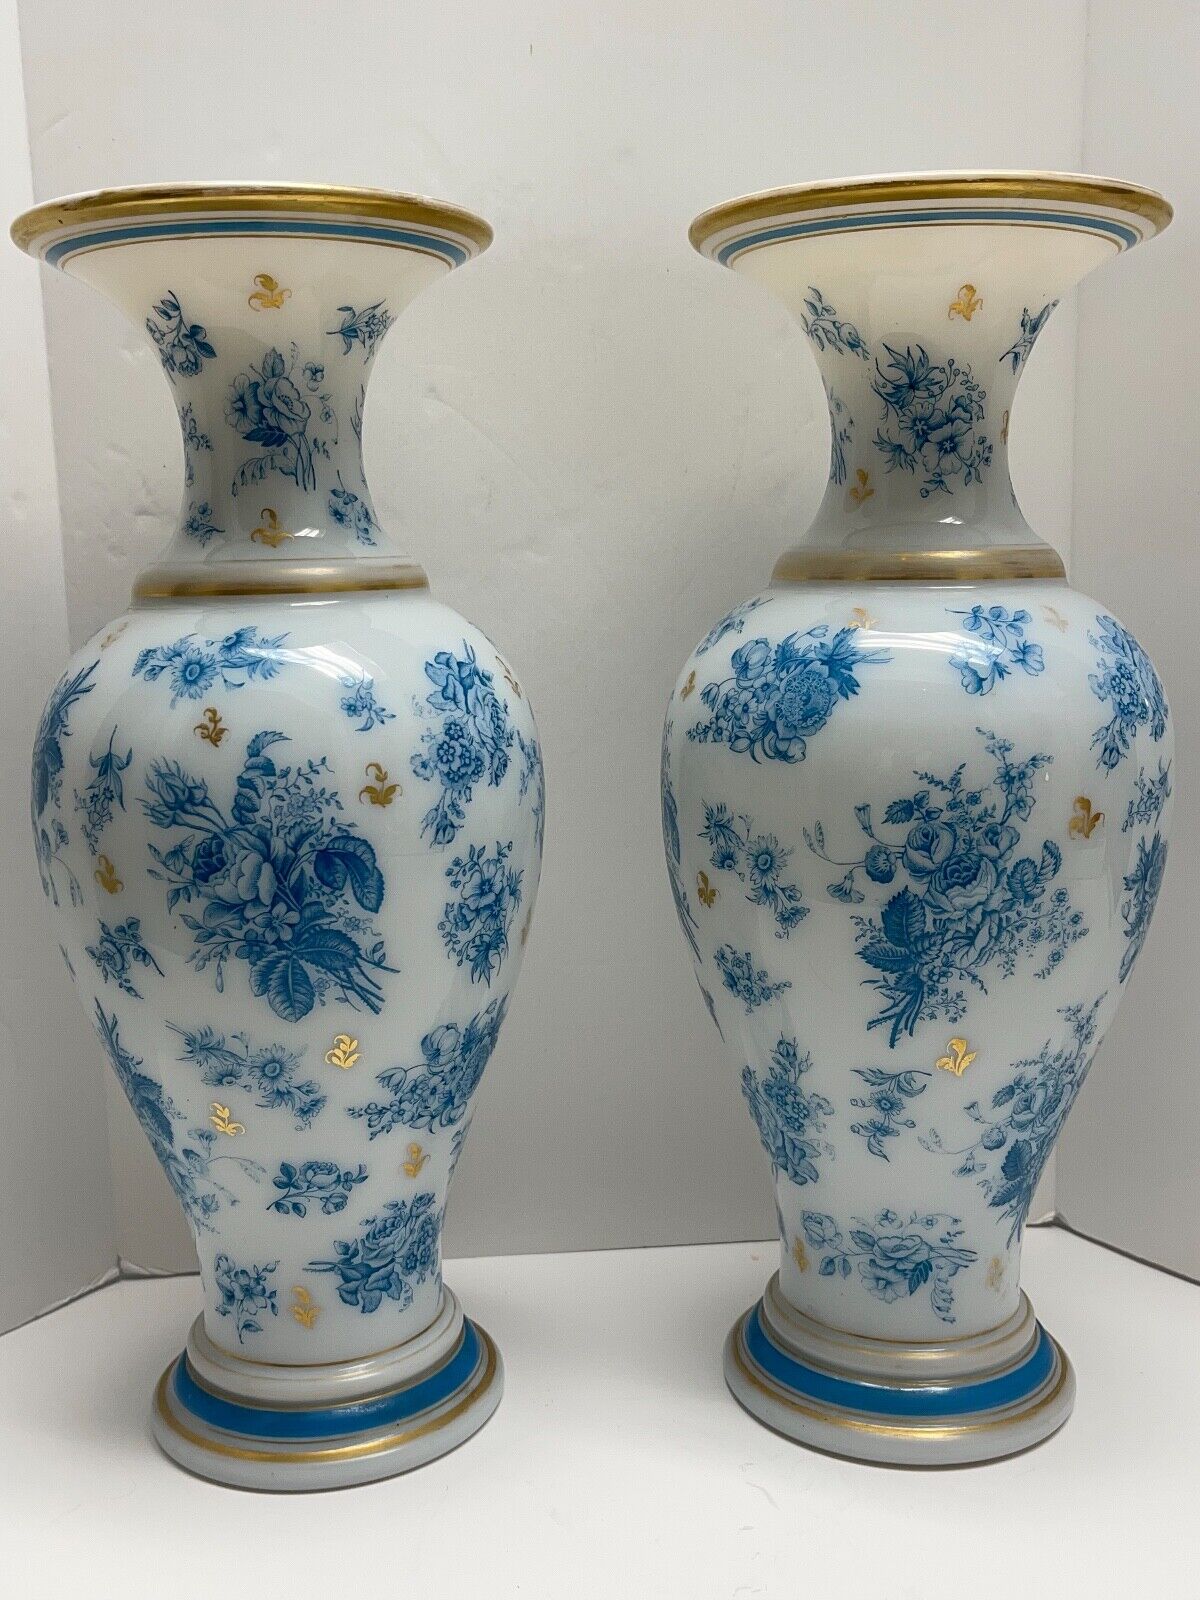 LARGE PAIR ANTIQUE BACCARAT FRENCH WHITE OPALINE VASES WITH PAINTED BLUE FLOWERS